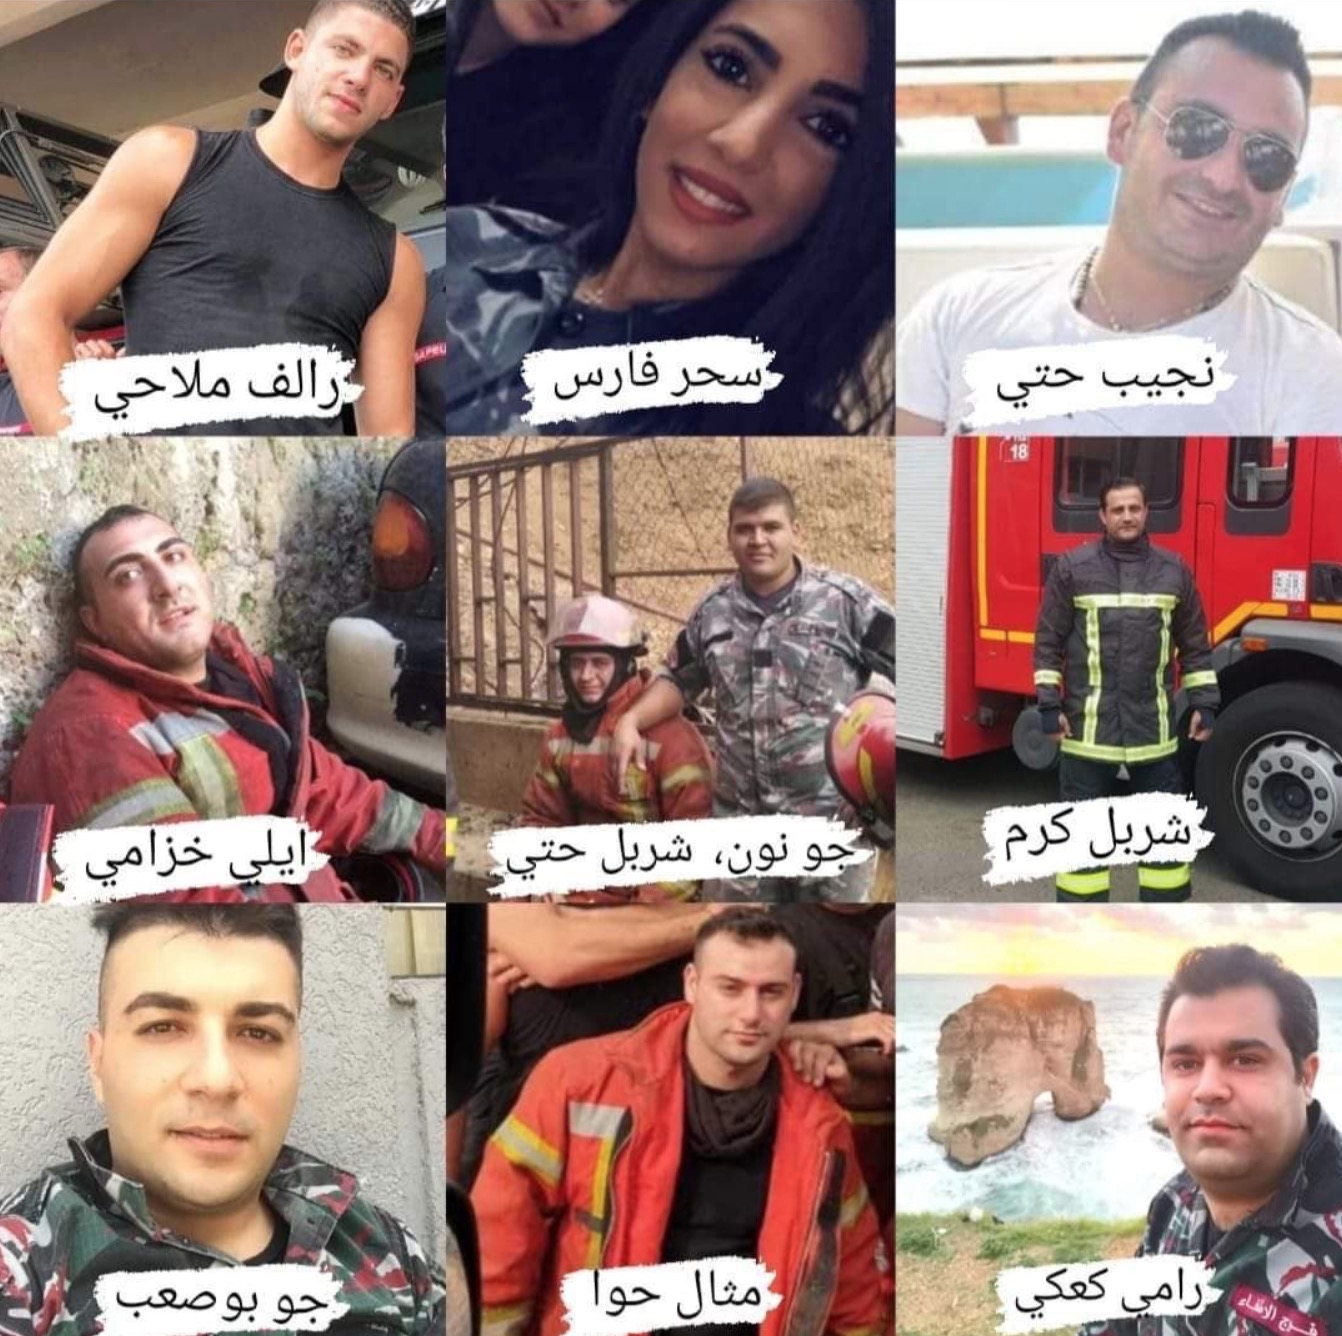 Firefighter victims